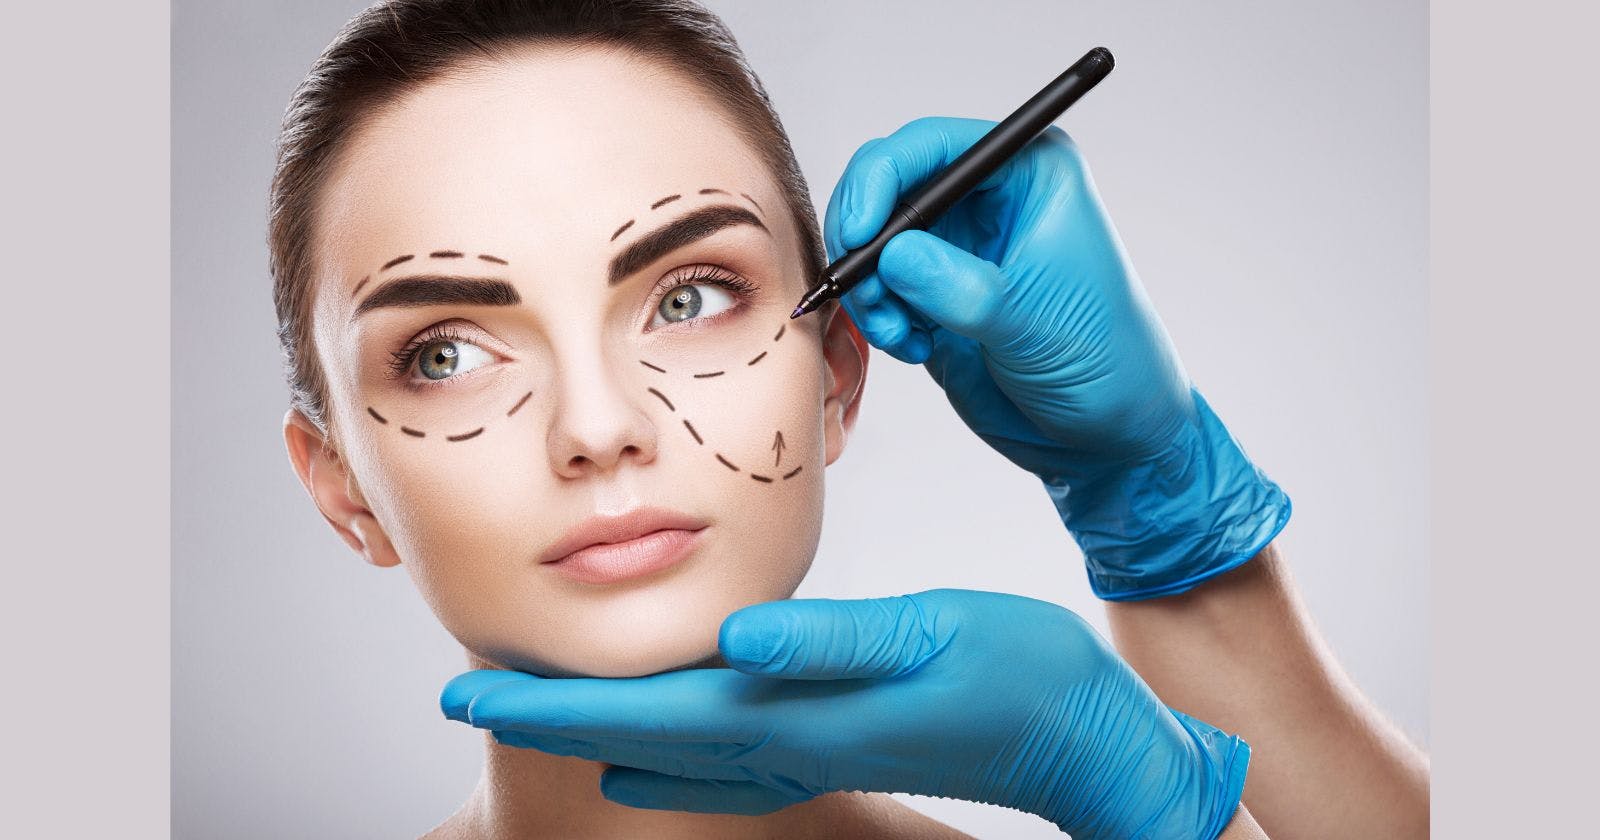 Know About the Different Types of Facial Plastic Surgery